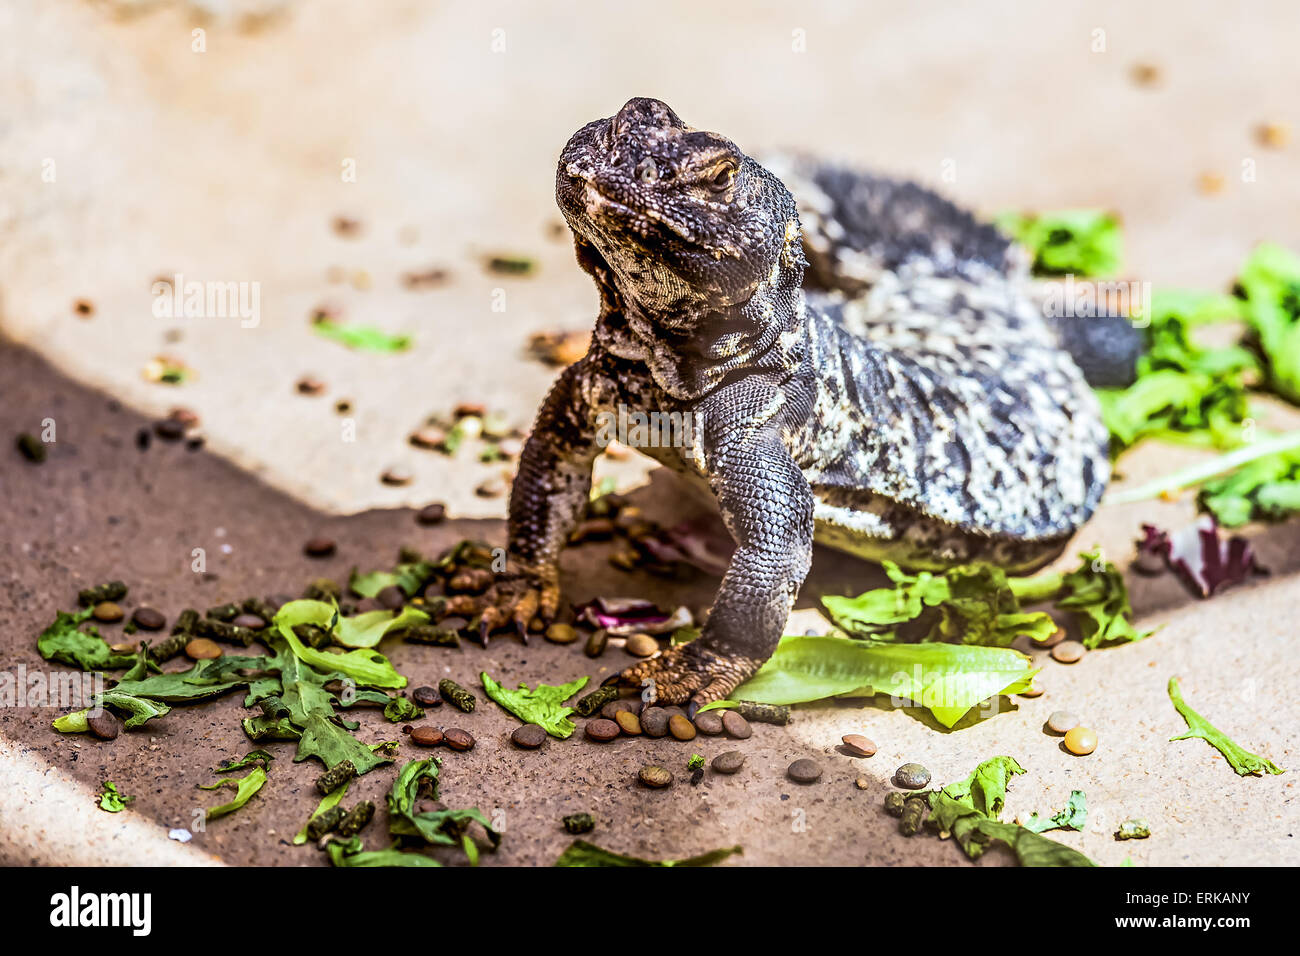 Lizard or lacertian reptile sitting on the ground Stock Photo